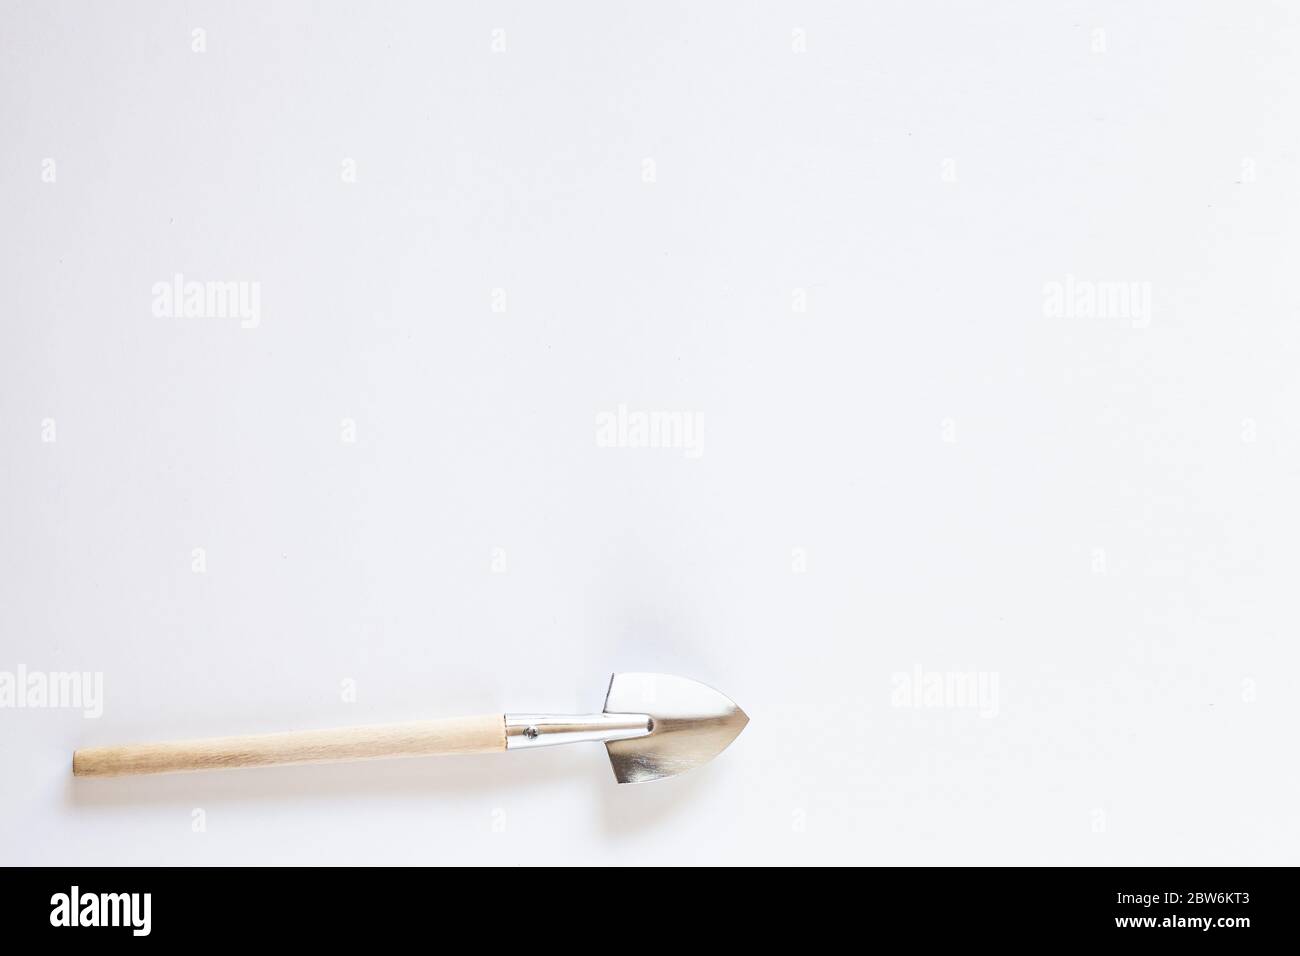 Gardening at home. Growing food on windowsill. Tools for seedlings. frame for text, top view. Flatlay on white wooden background. small household shov Stock Photo